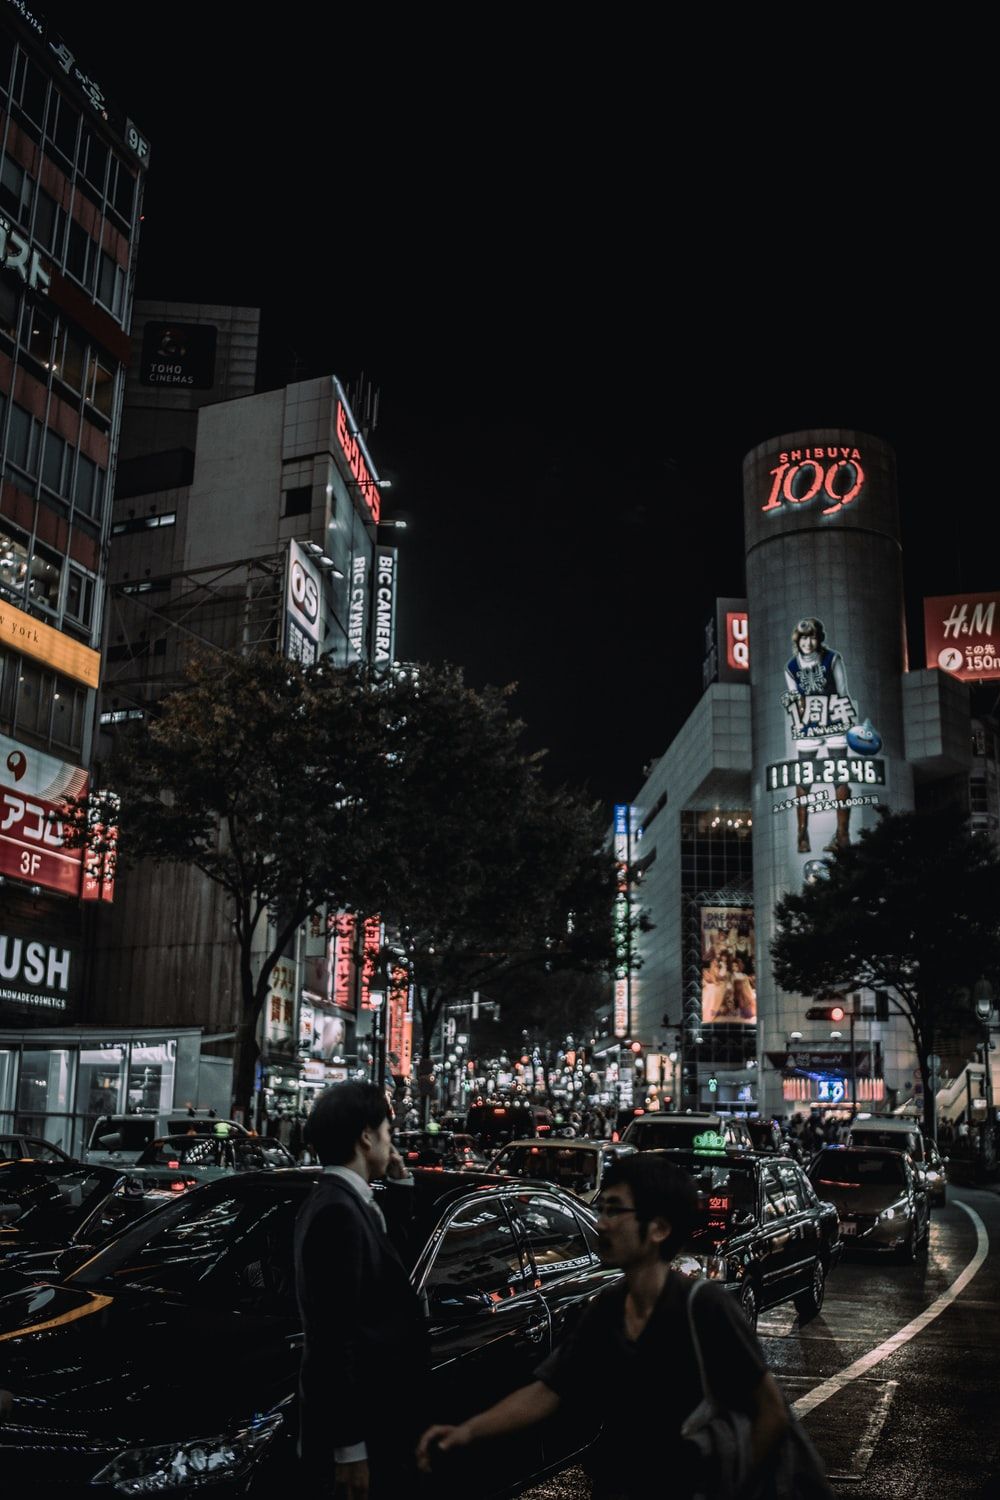 Shibuya Crossing Picture. Download Free Image